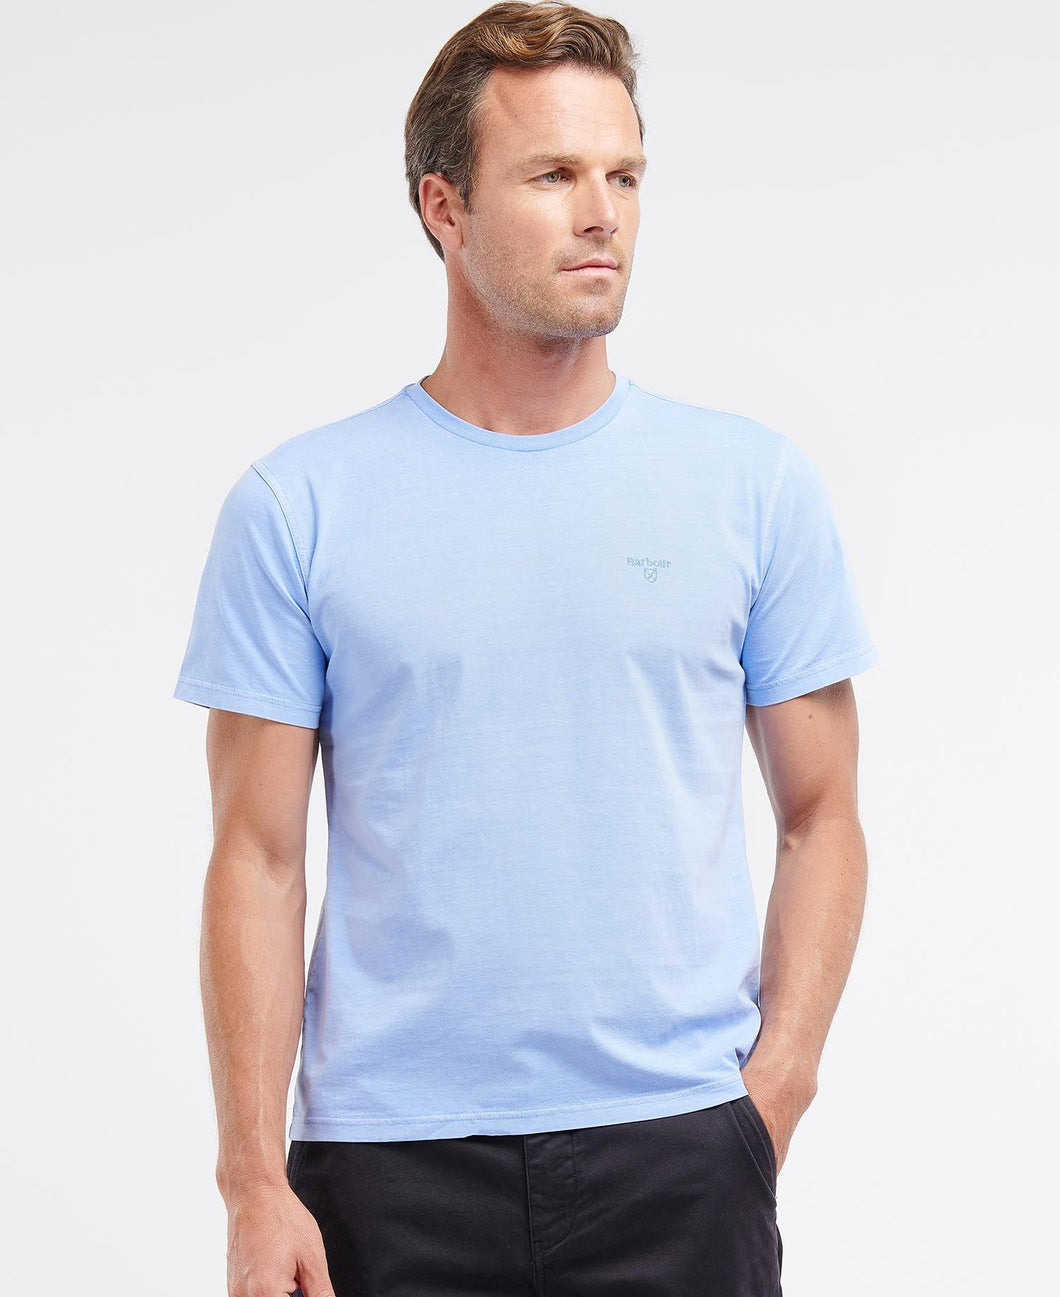 Barbour - Garment Dyed T, Sky